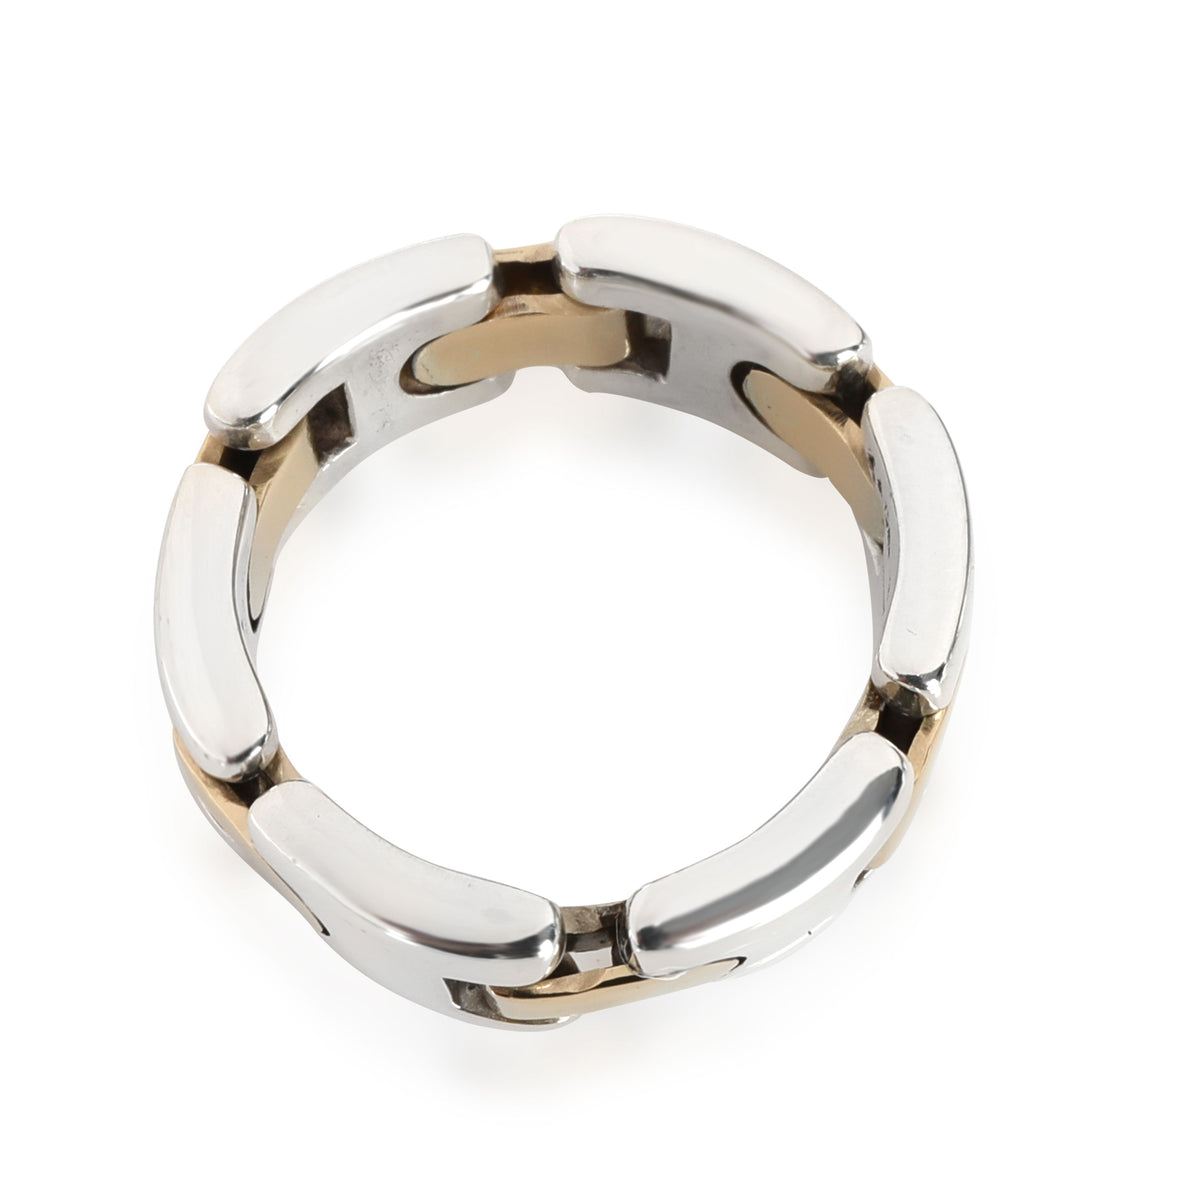 Tiffany & Co. Flexible Link Band in 18K Yellow Gold/Sterling Silver